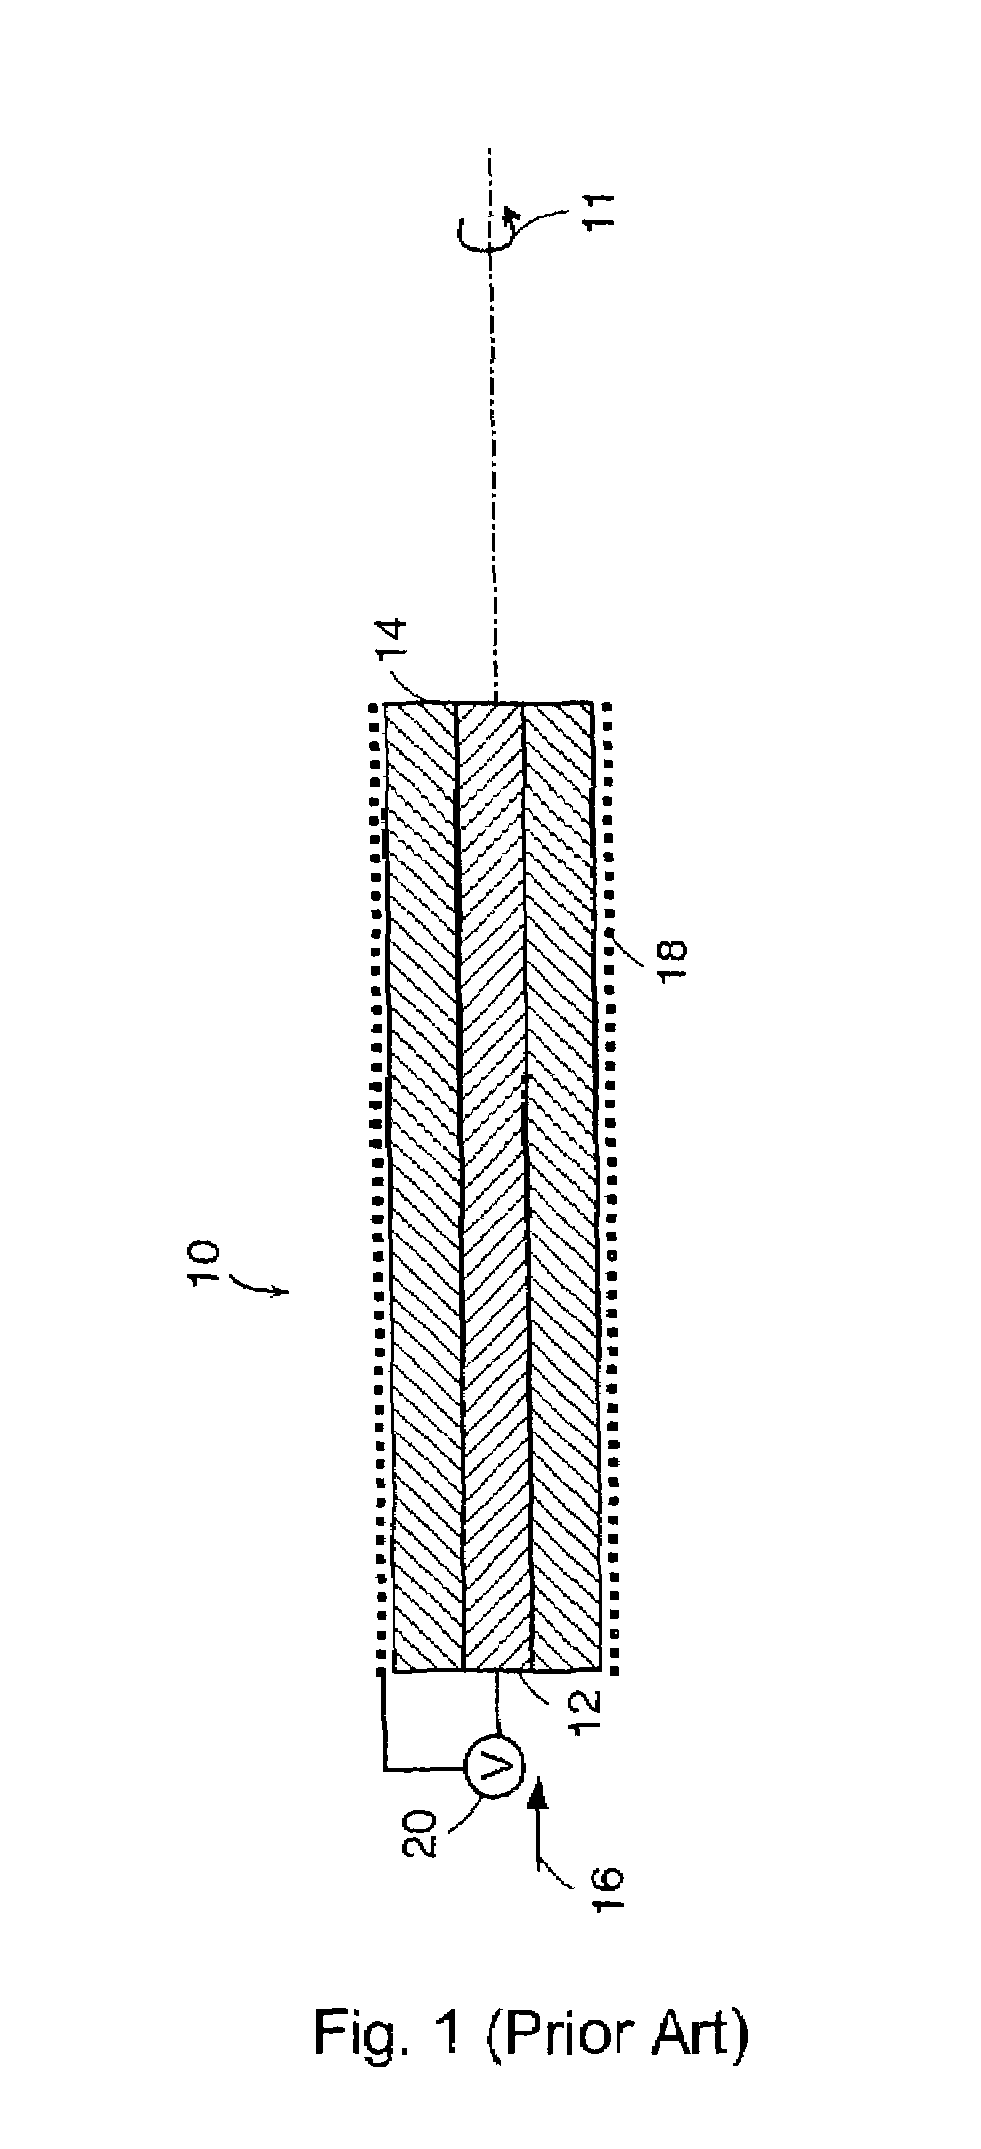 Electroactive polymer actuated medical devices